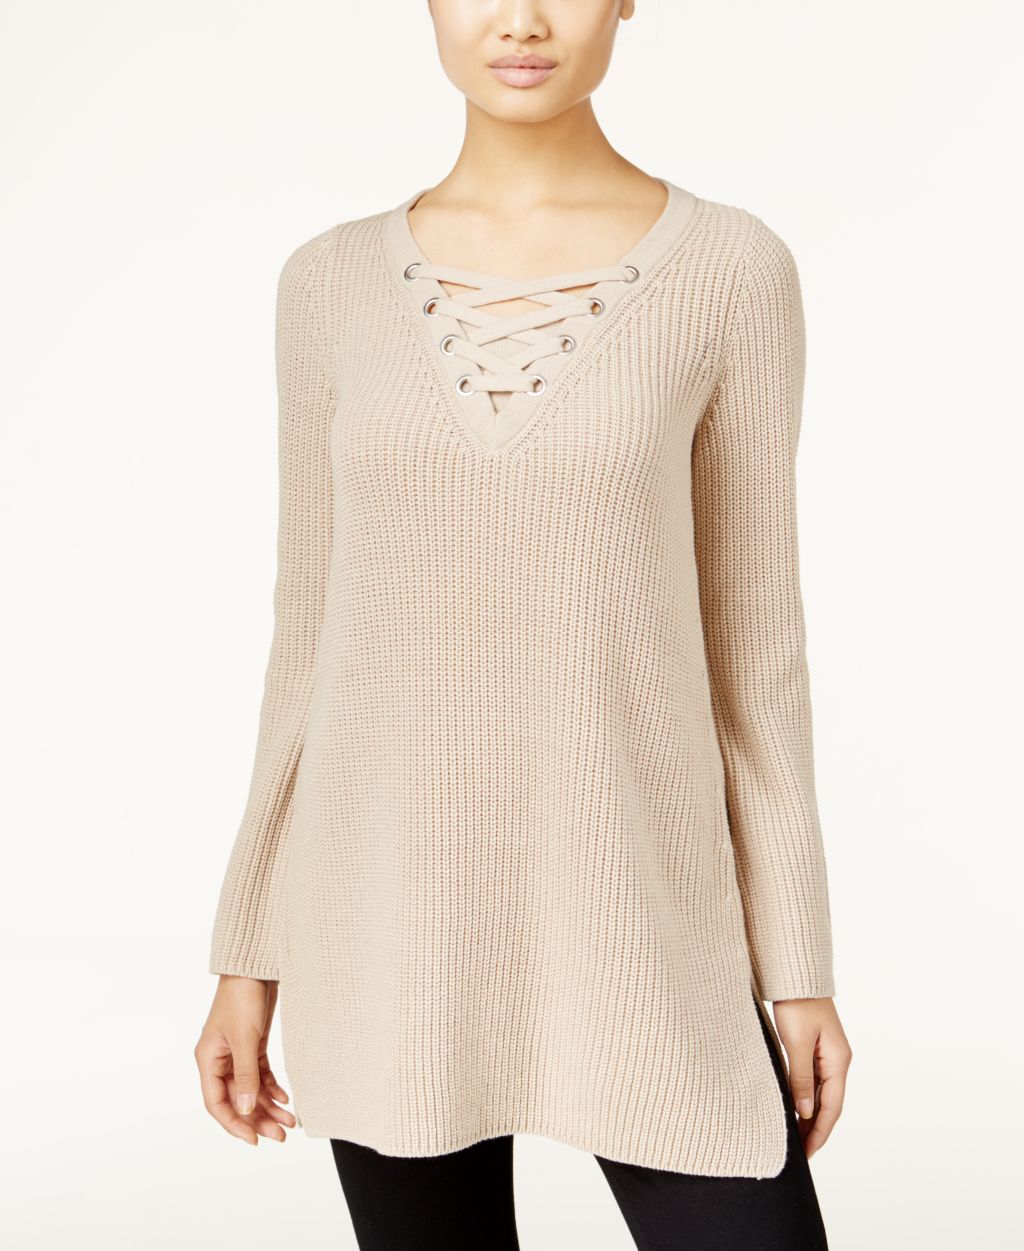 Style & Co. Long Sleeves Lace-Up Tunic Sweater, Only at Macy's